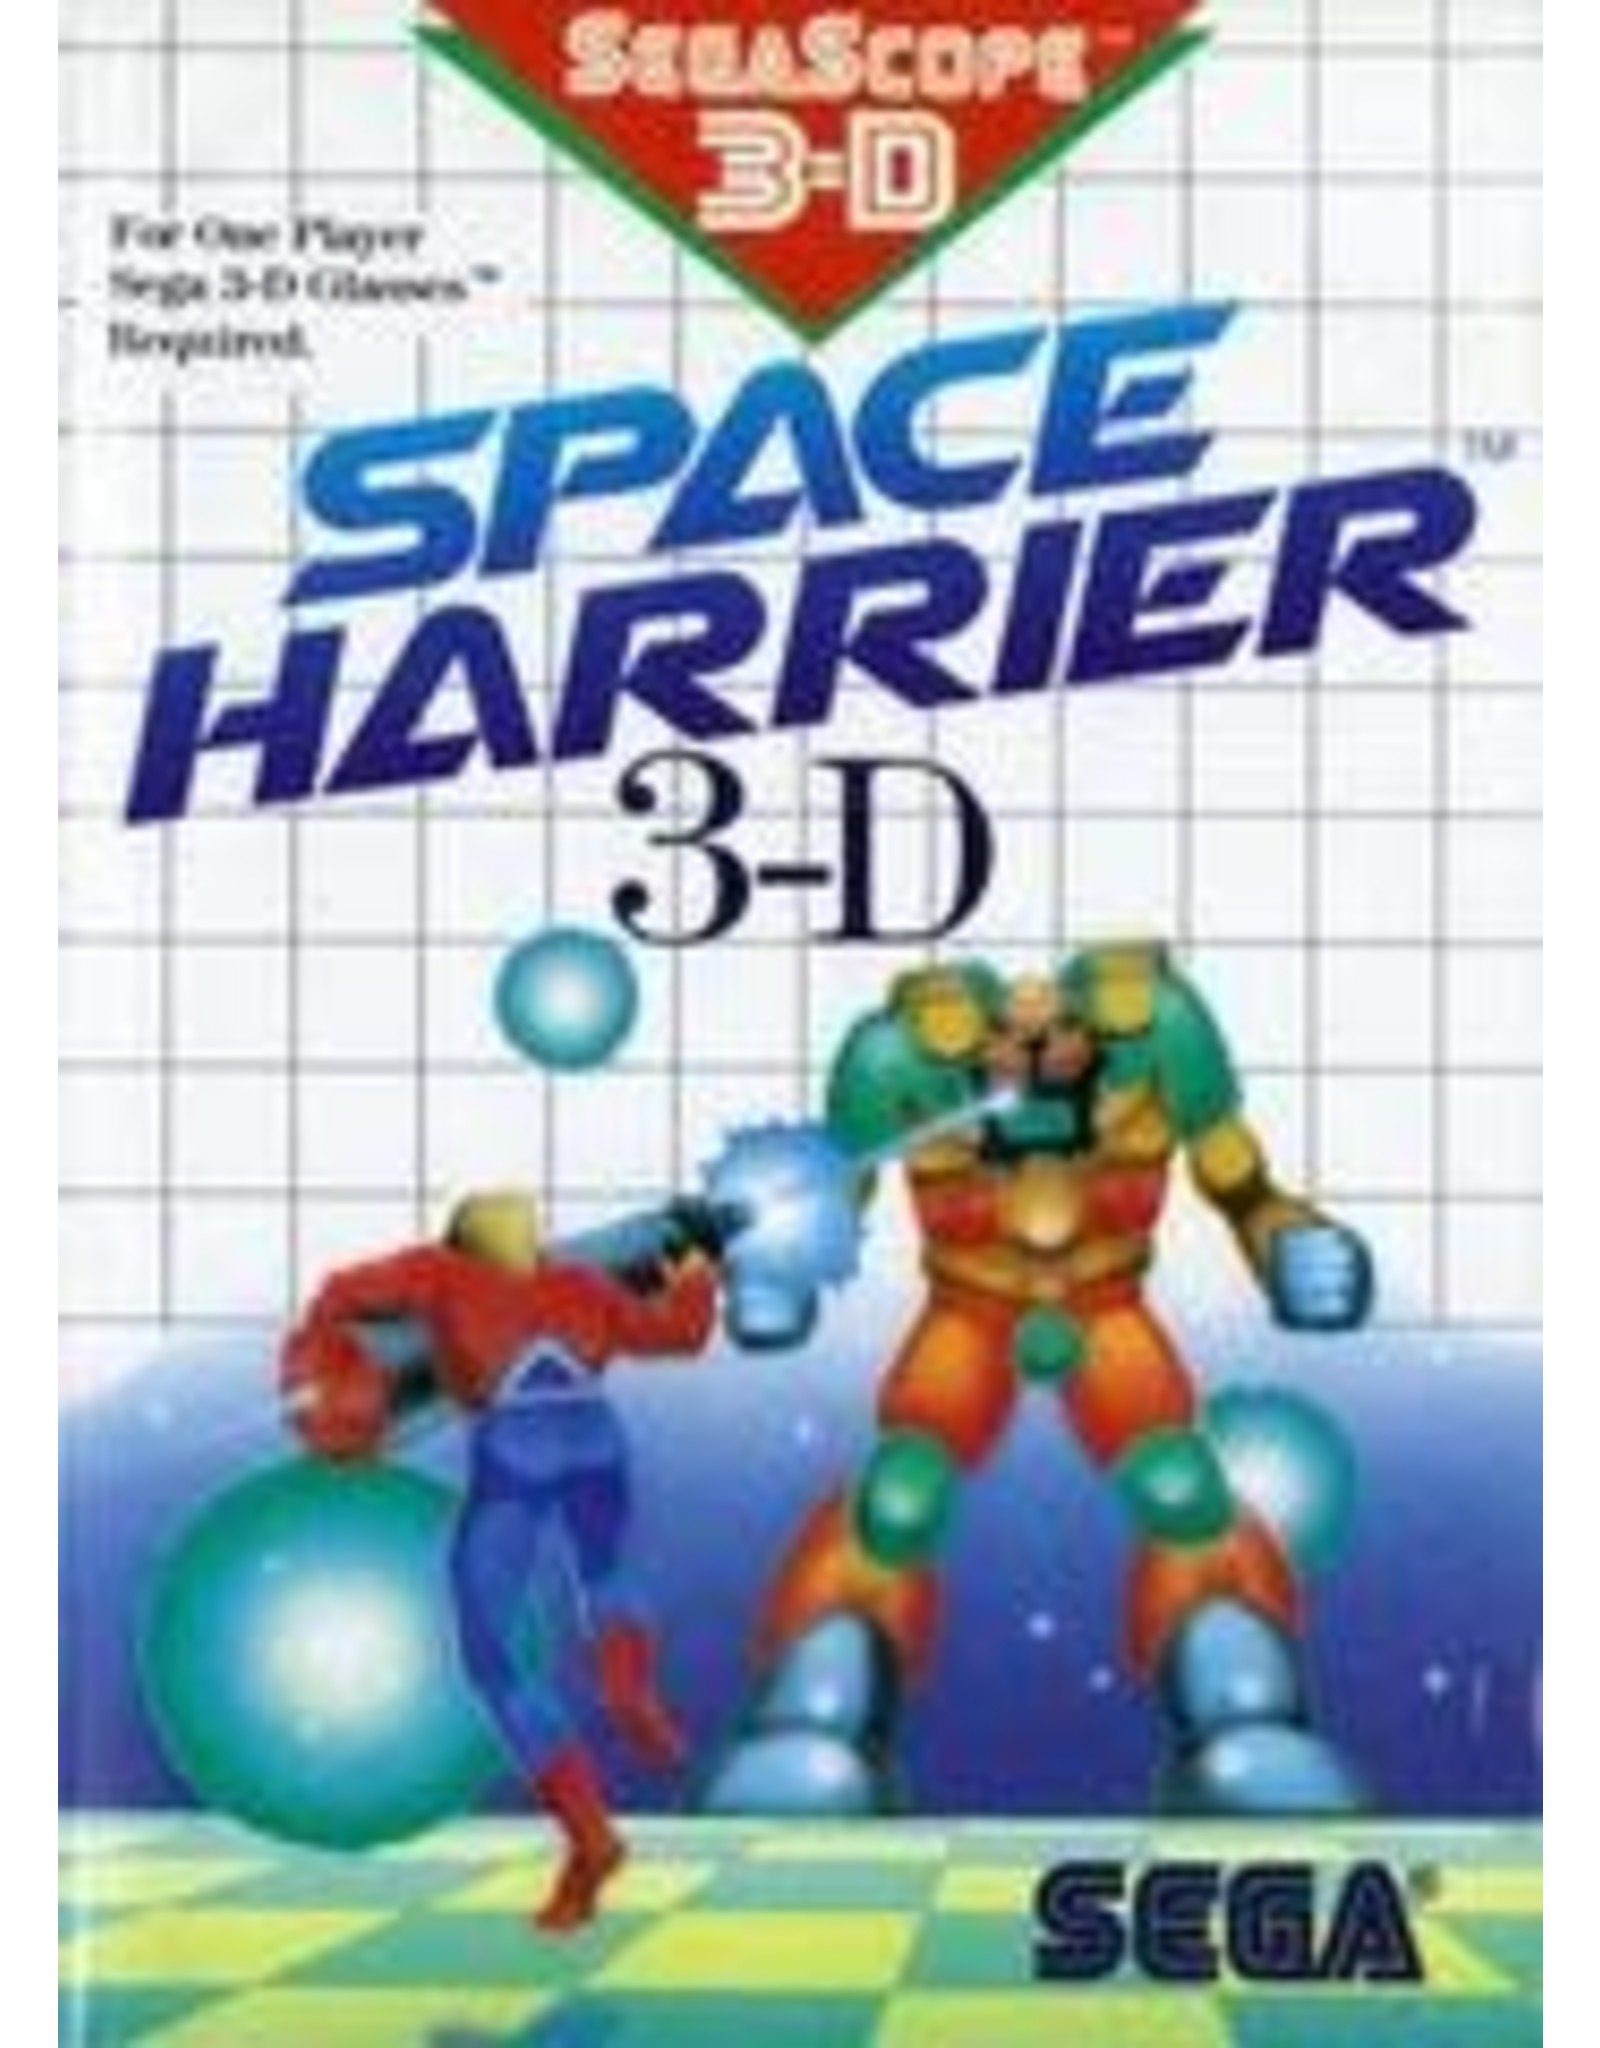 Sega Master System Space Harrier 3D (Boxed, No Manual, Water Damaged Sleeve)